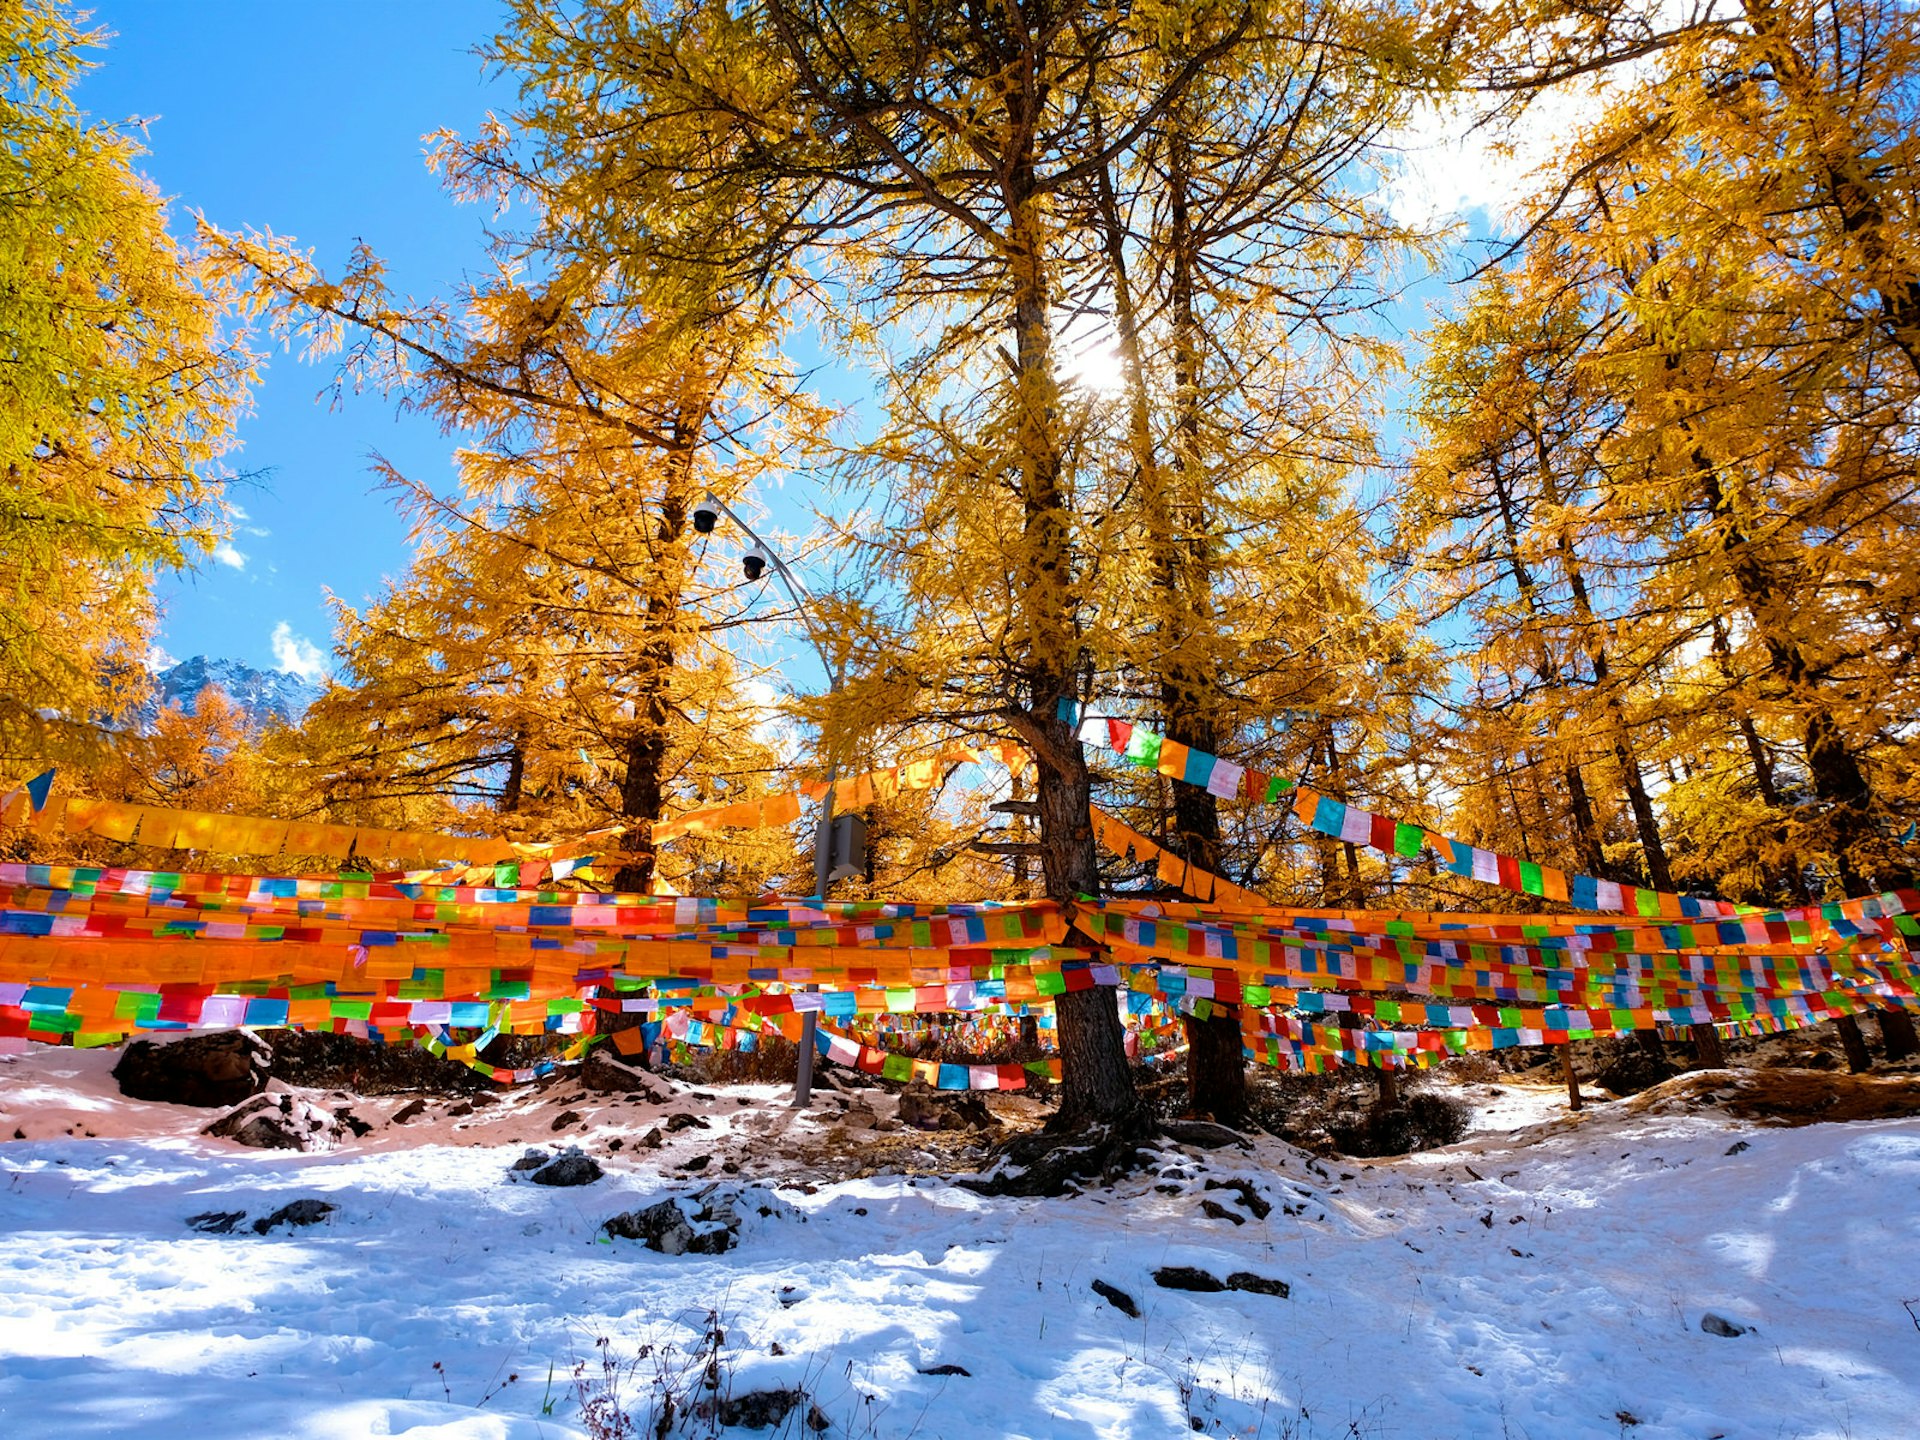 Colourful prayer flags strung between trees with yellow leaves, and snow on the ground with mountains in the background. Serene Yading Nature Reserve combines Sichuan's incredible mountain scenery and Buddhist spirituality © Monpisut Varaganont / Shutterstock